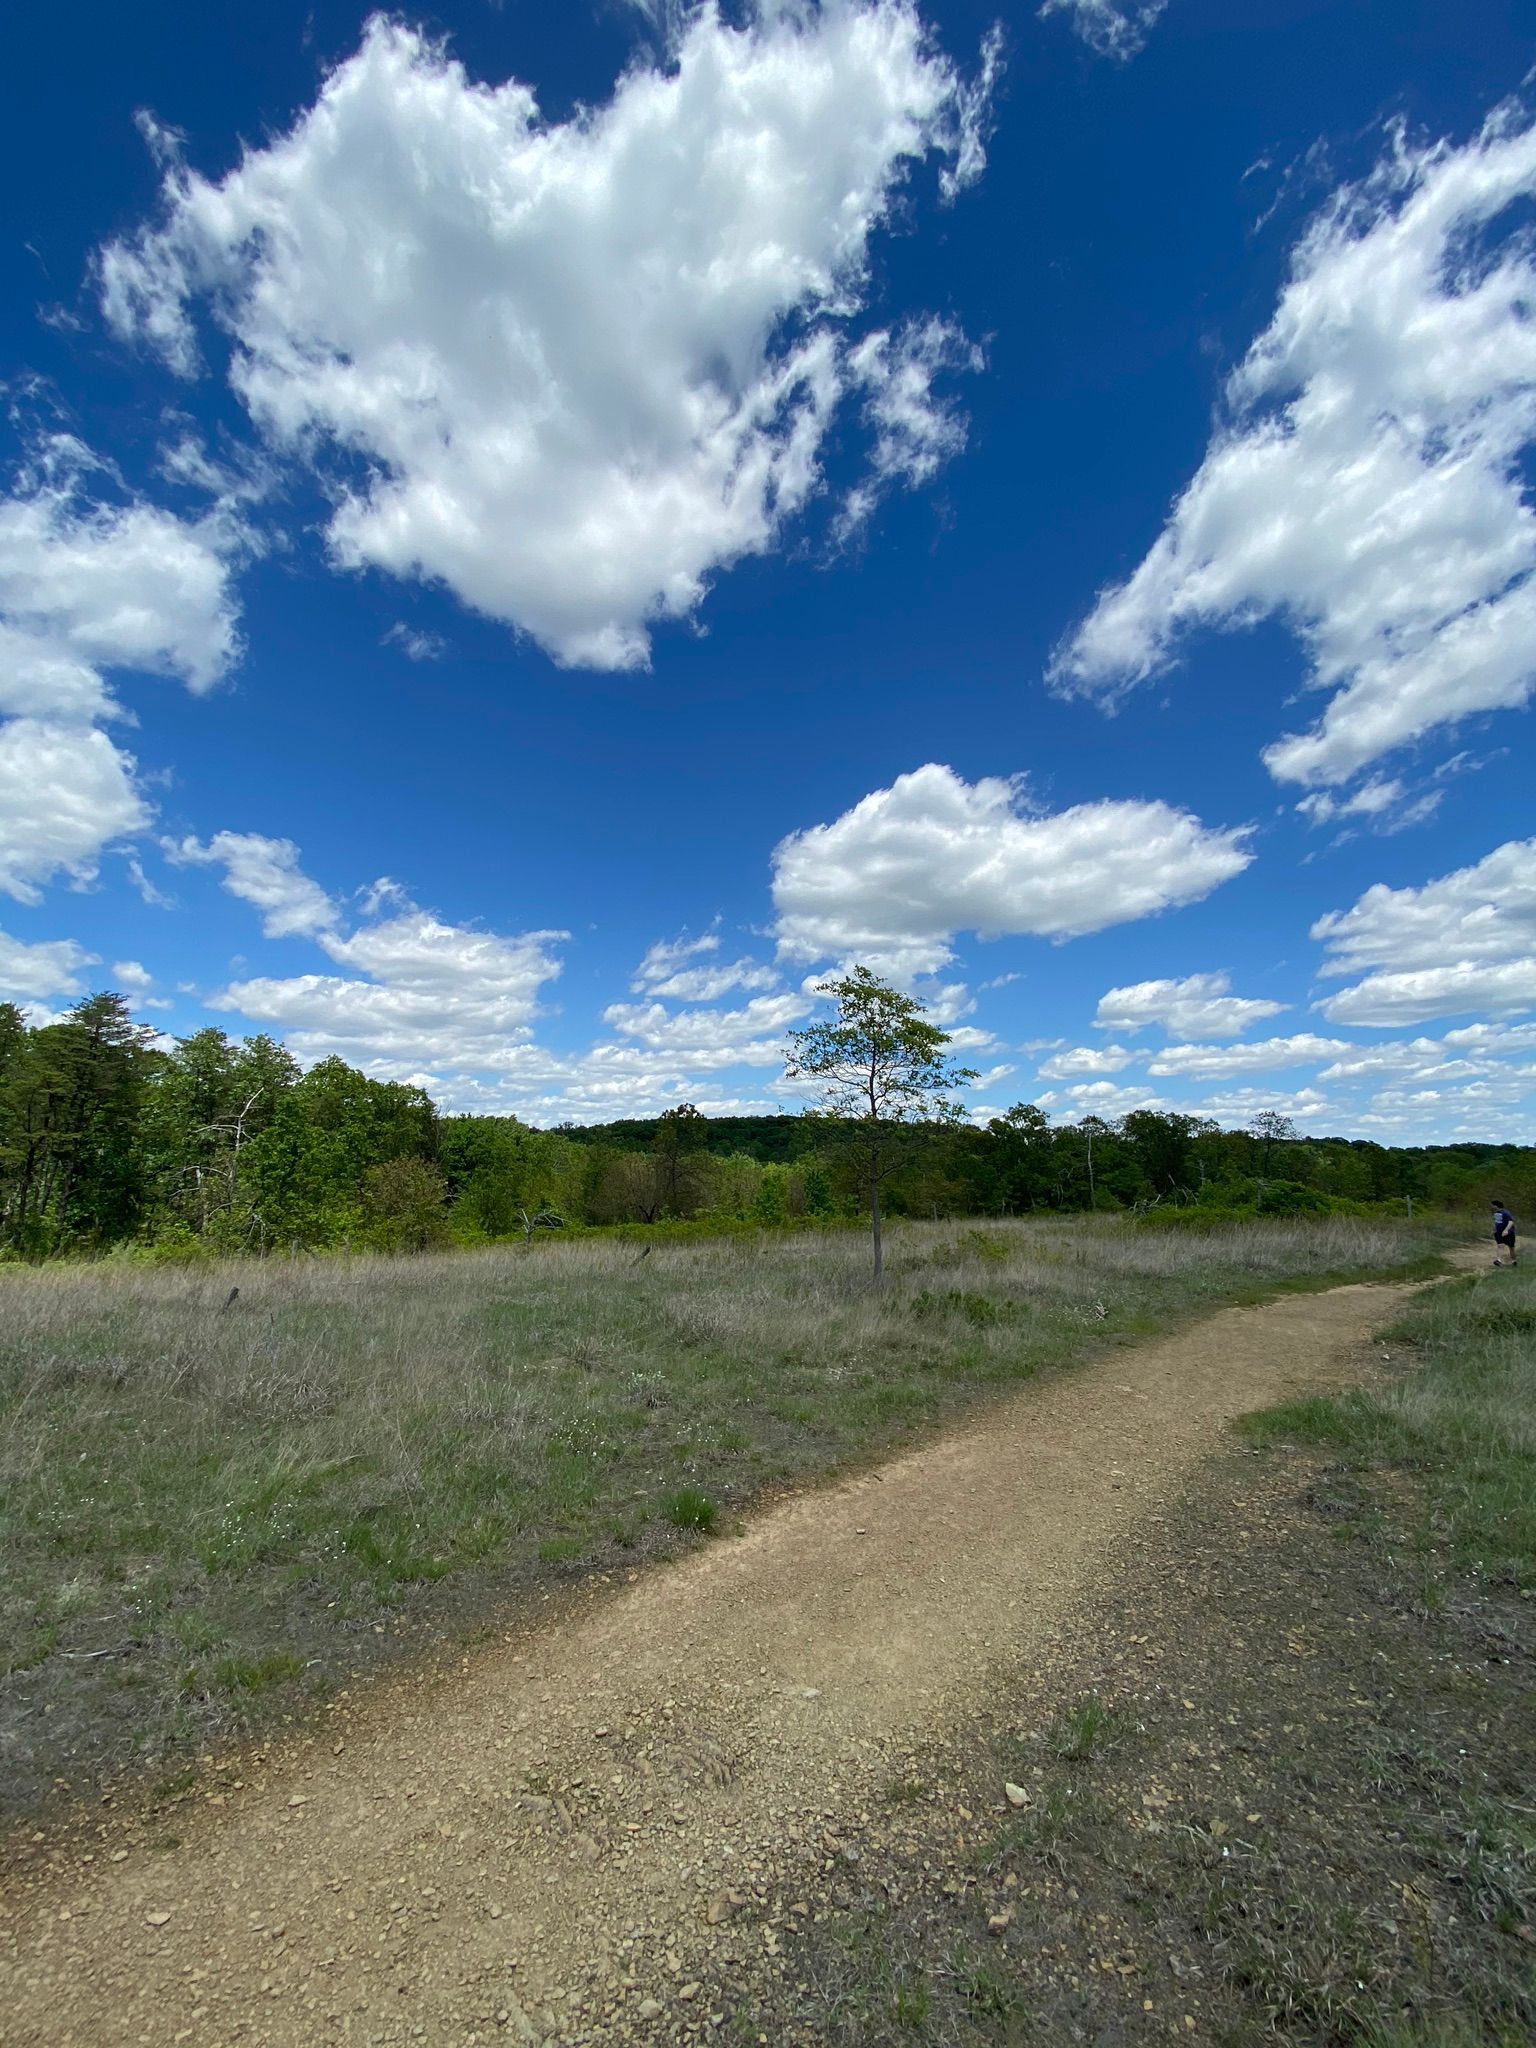 Blue sky with large white clouds, below the sky a stretch of trail at Solders Delight Natural Environmental Area in Owings Mills Maryland